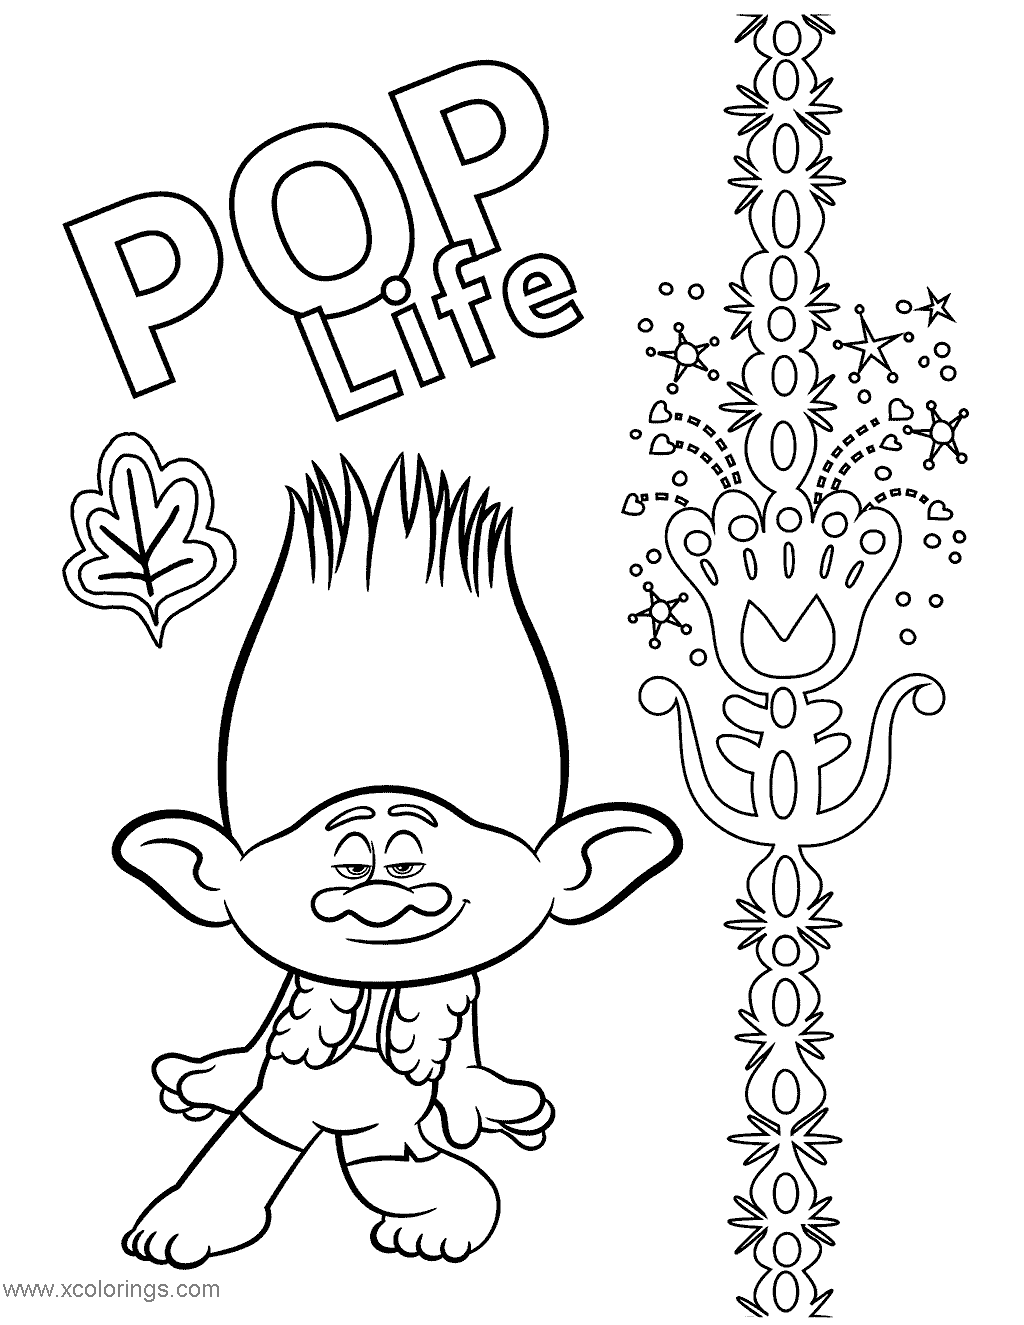 Free Trolls World Tour Pop is Life Coloring Pages printable